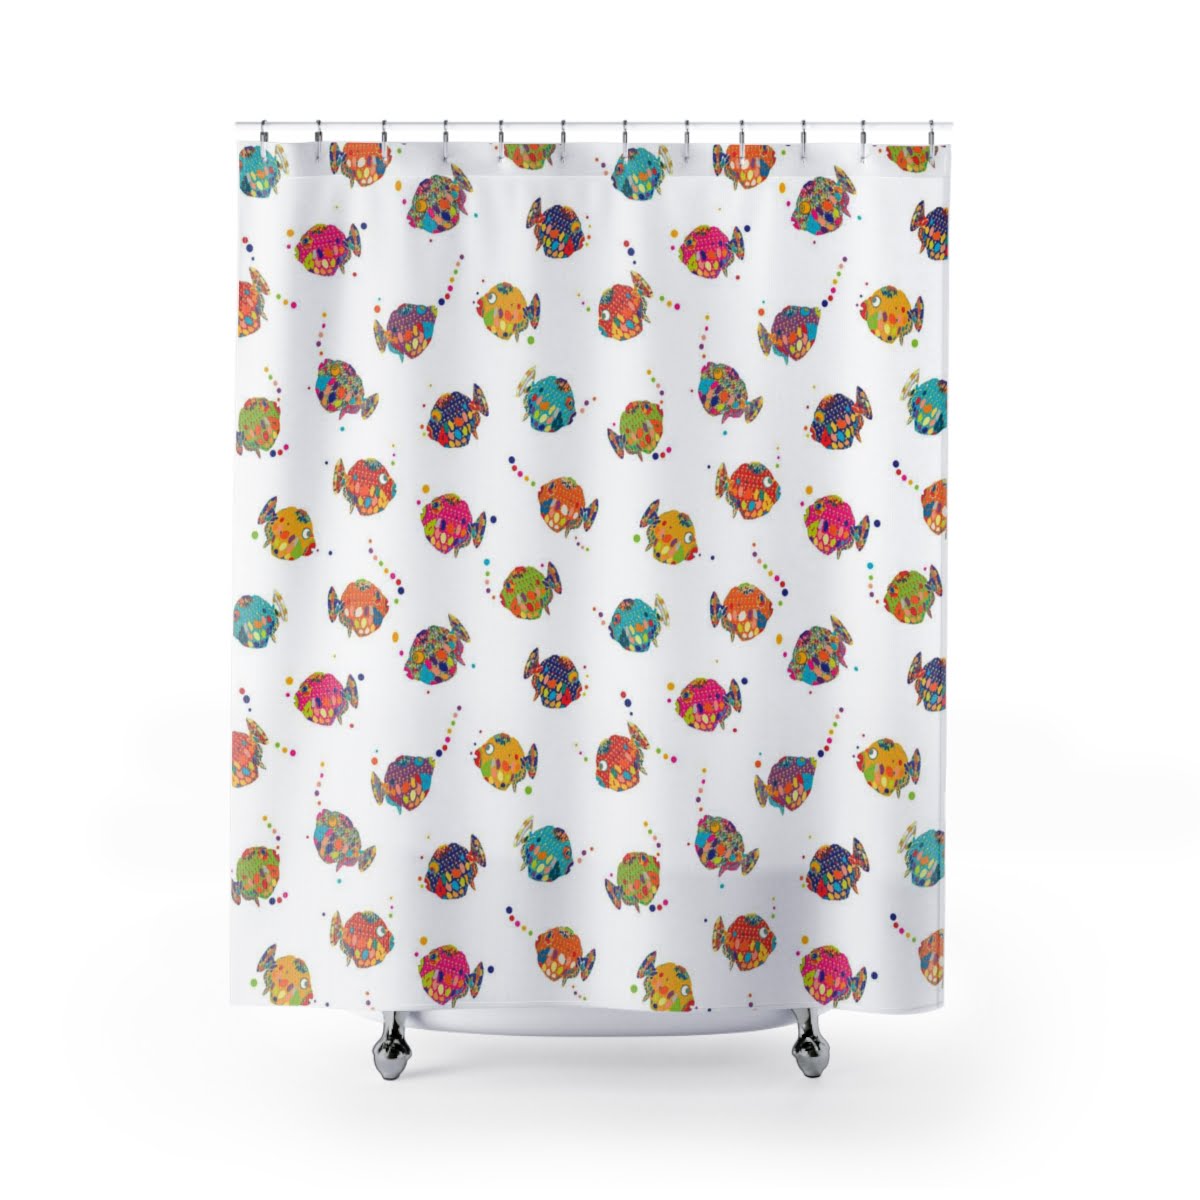 Kids Shower Curtain With Colorful Fish to Match Bathroom Set